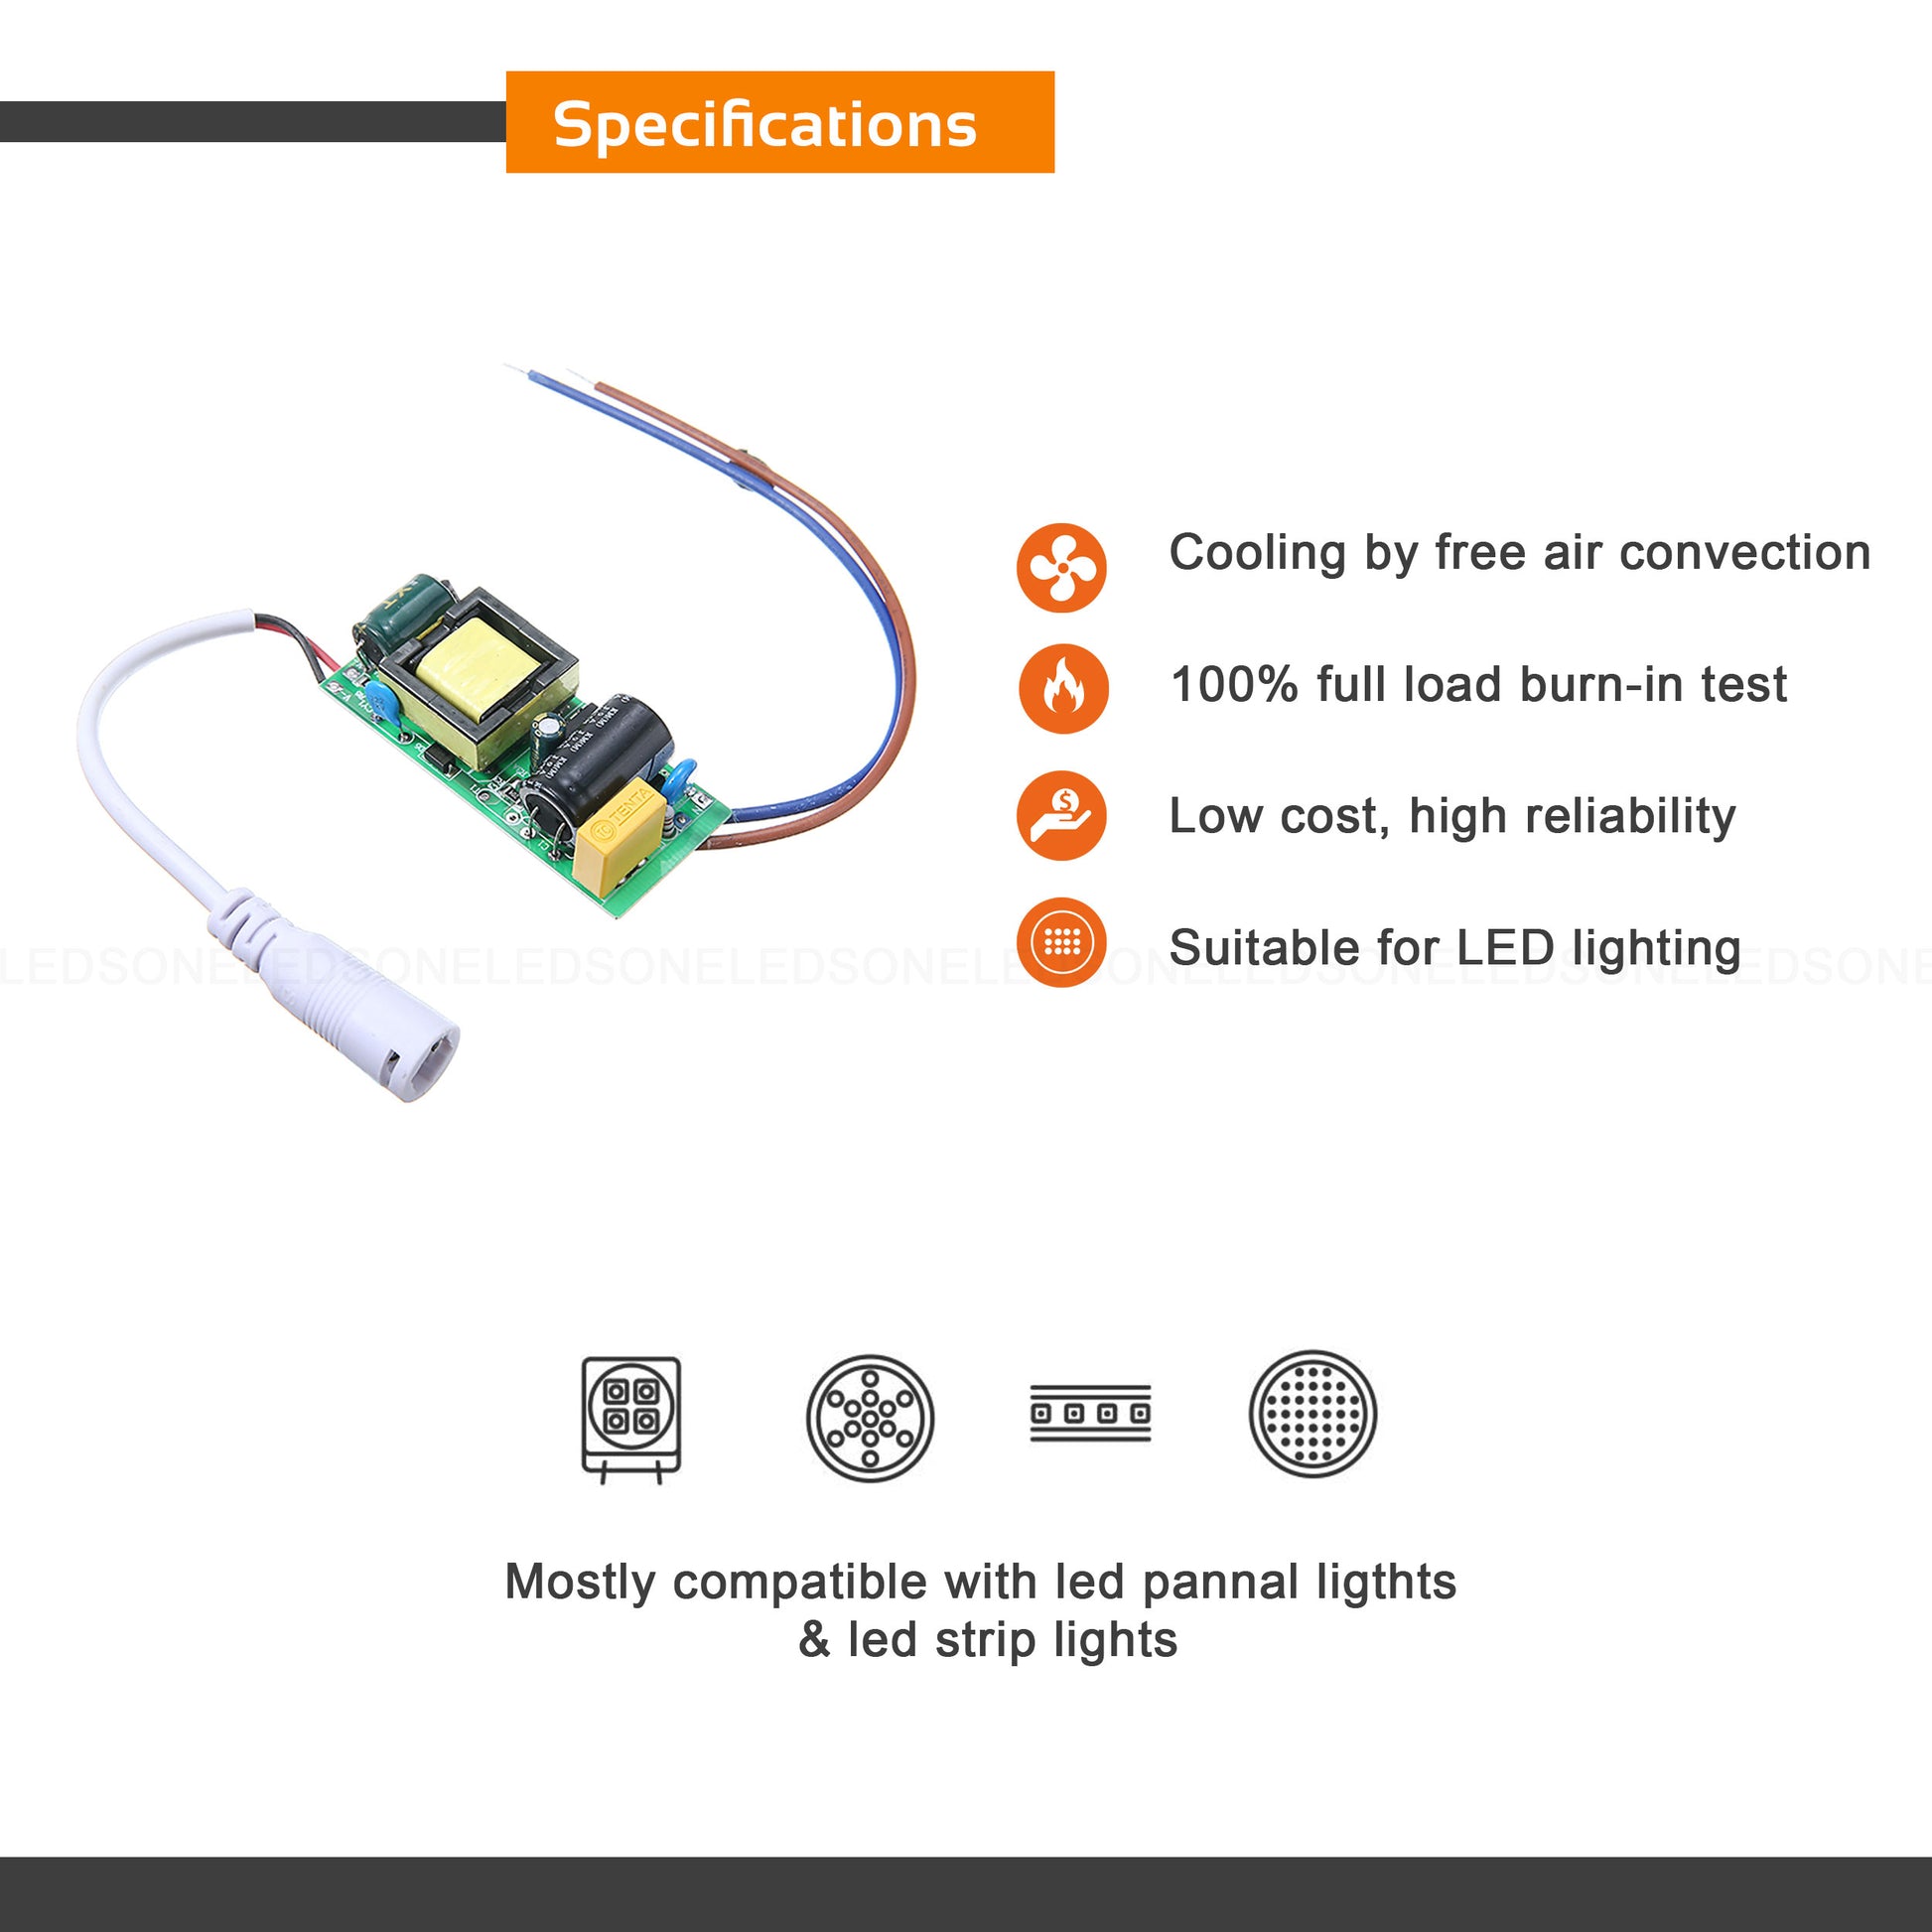 Specifications of 25w LED Driver